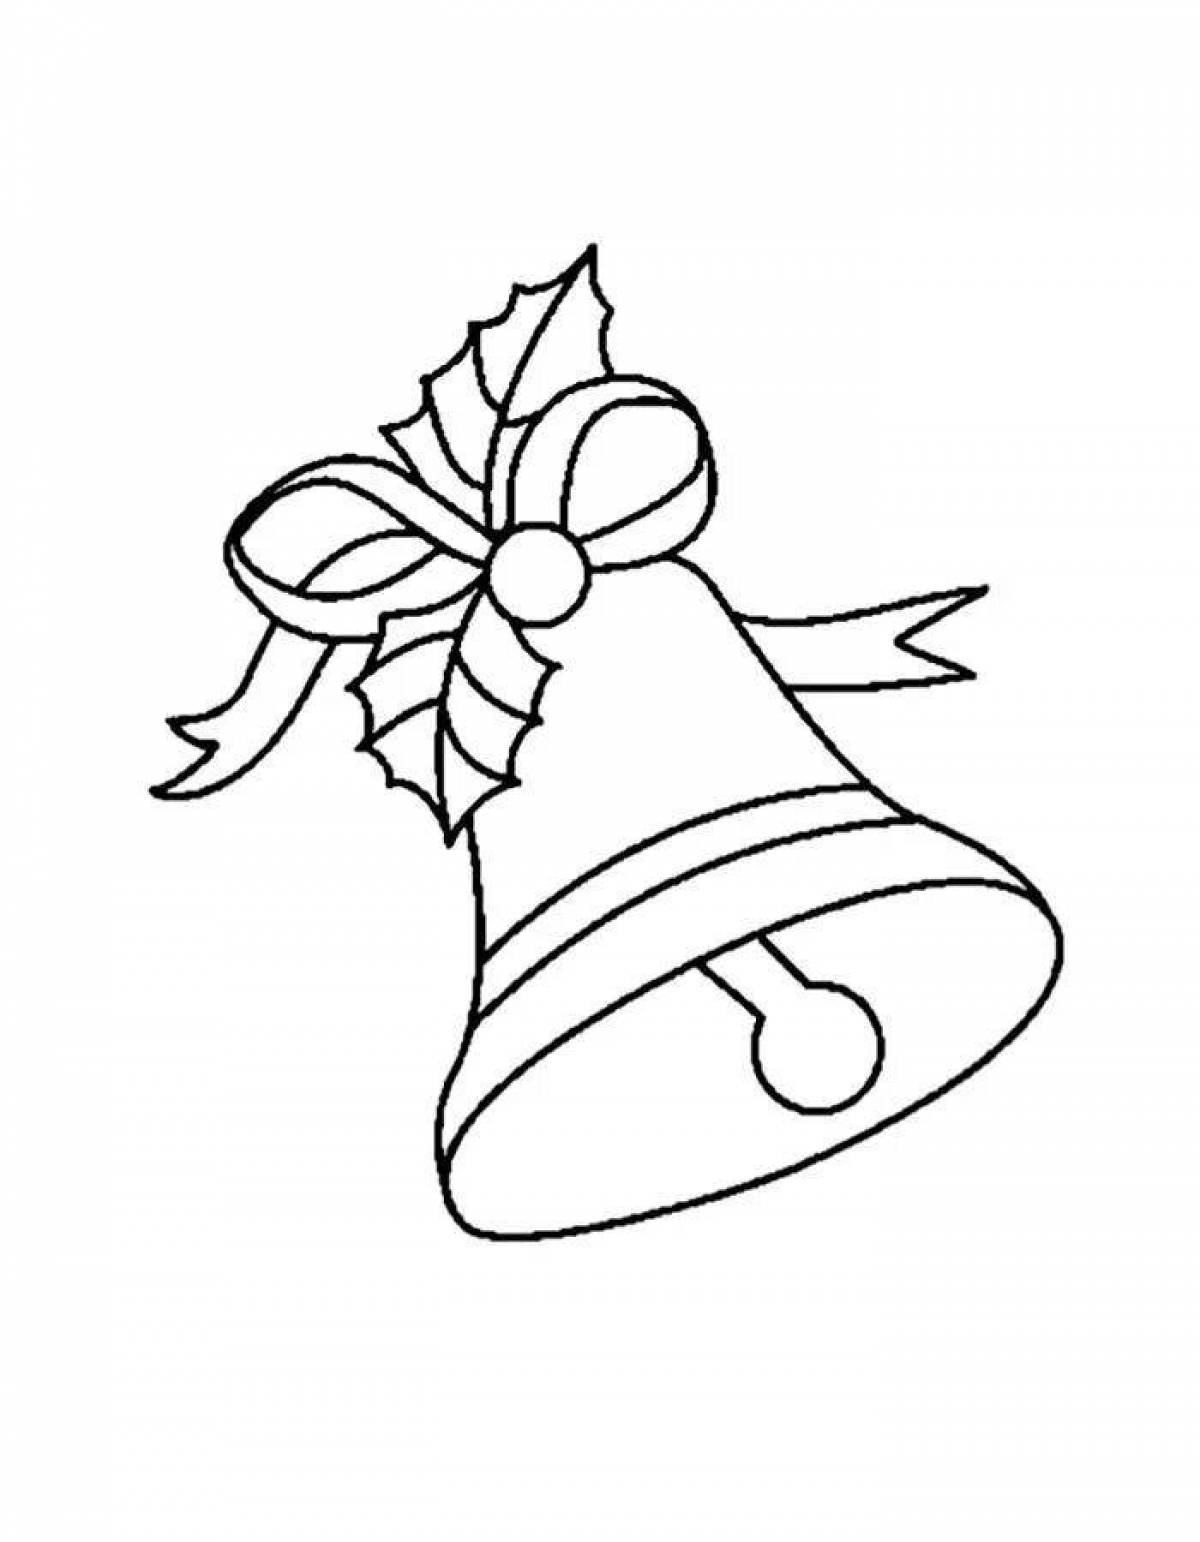 Glowing school bell coloring page